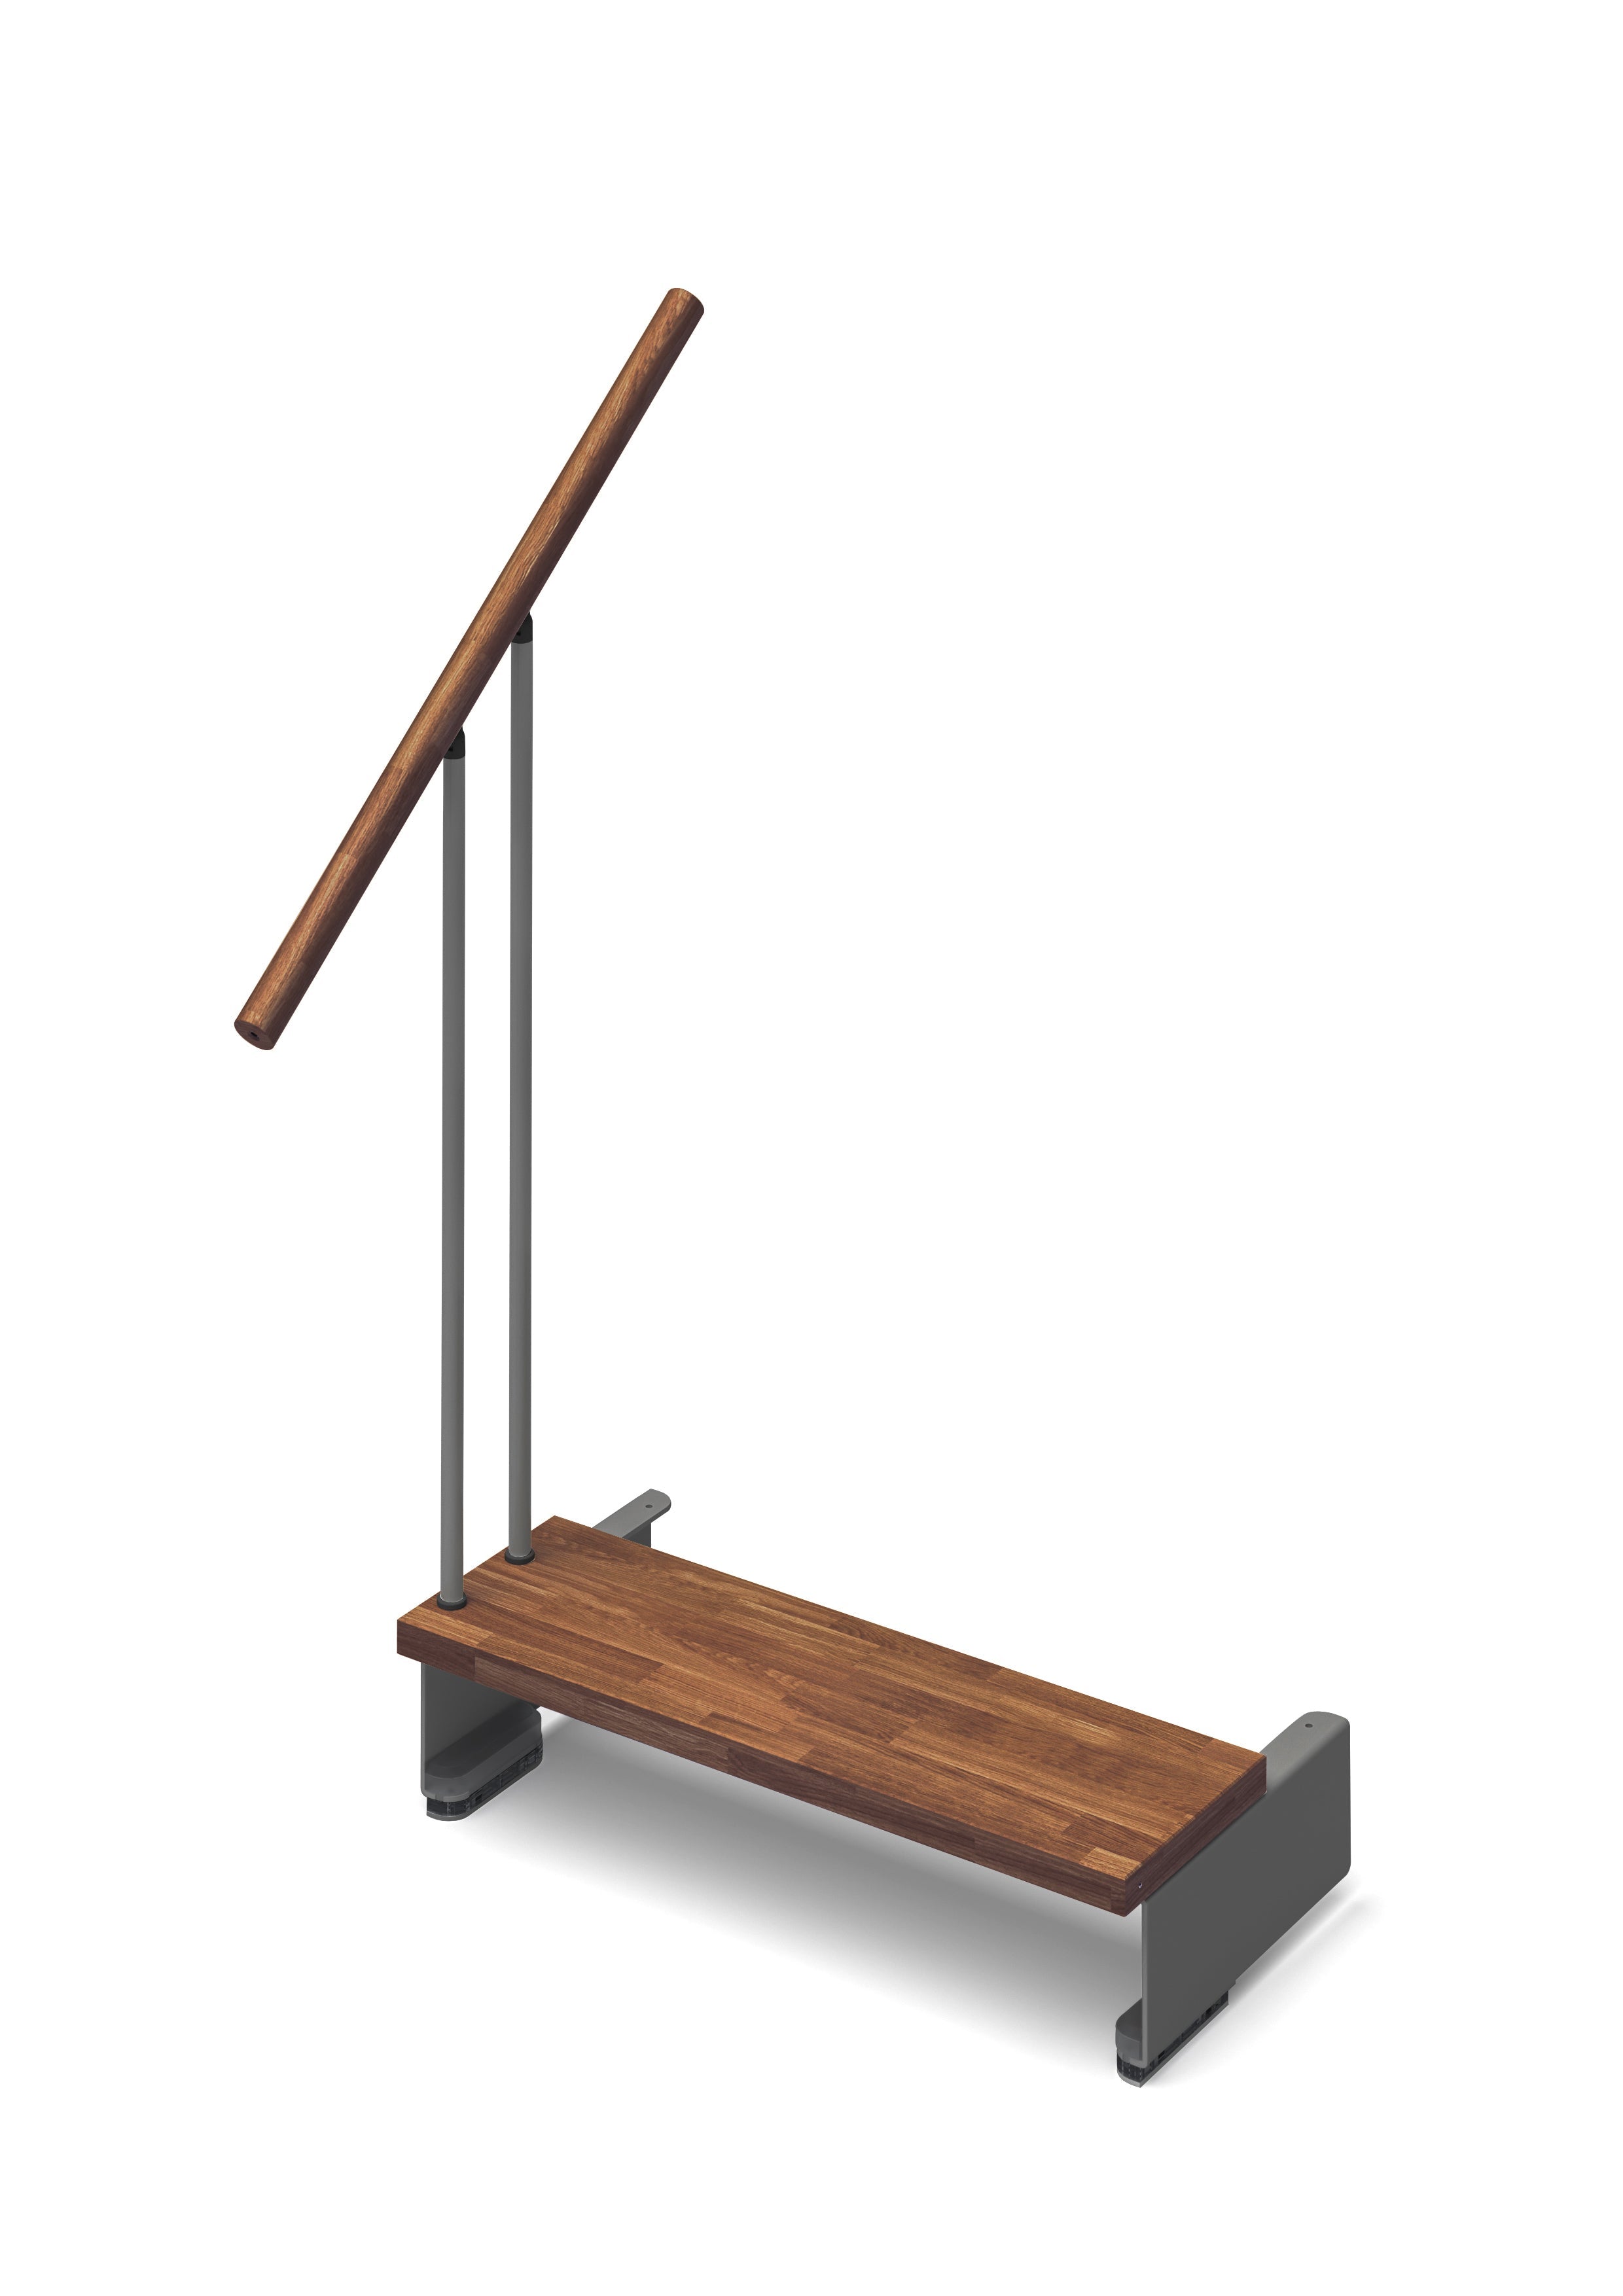 Additional step Adapta 84cm (with structure and railing) - Walnut 25